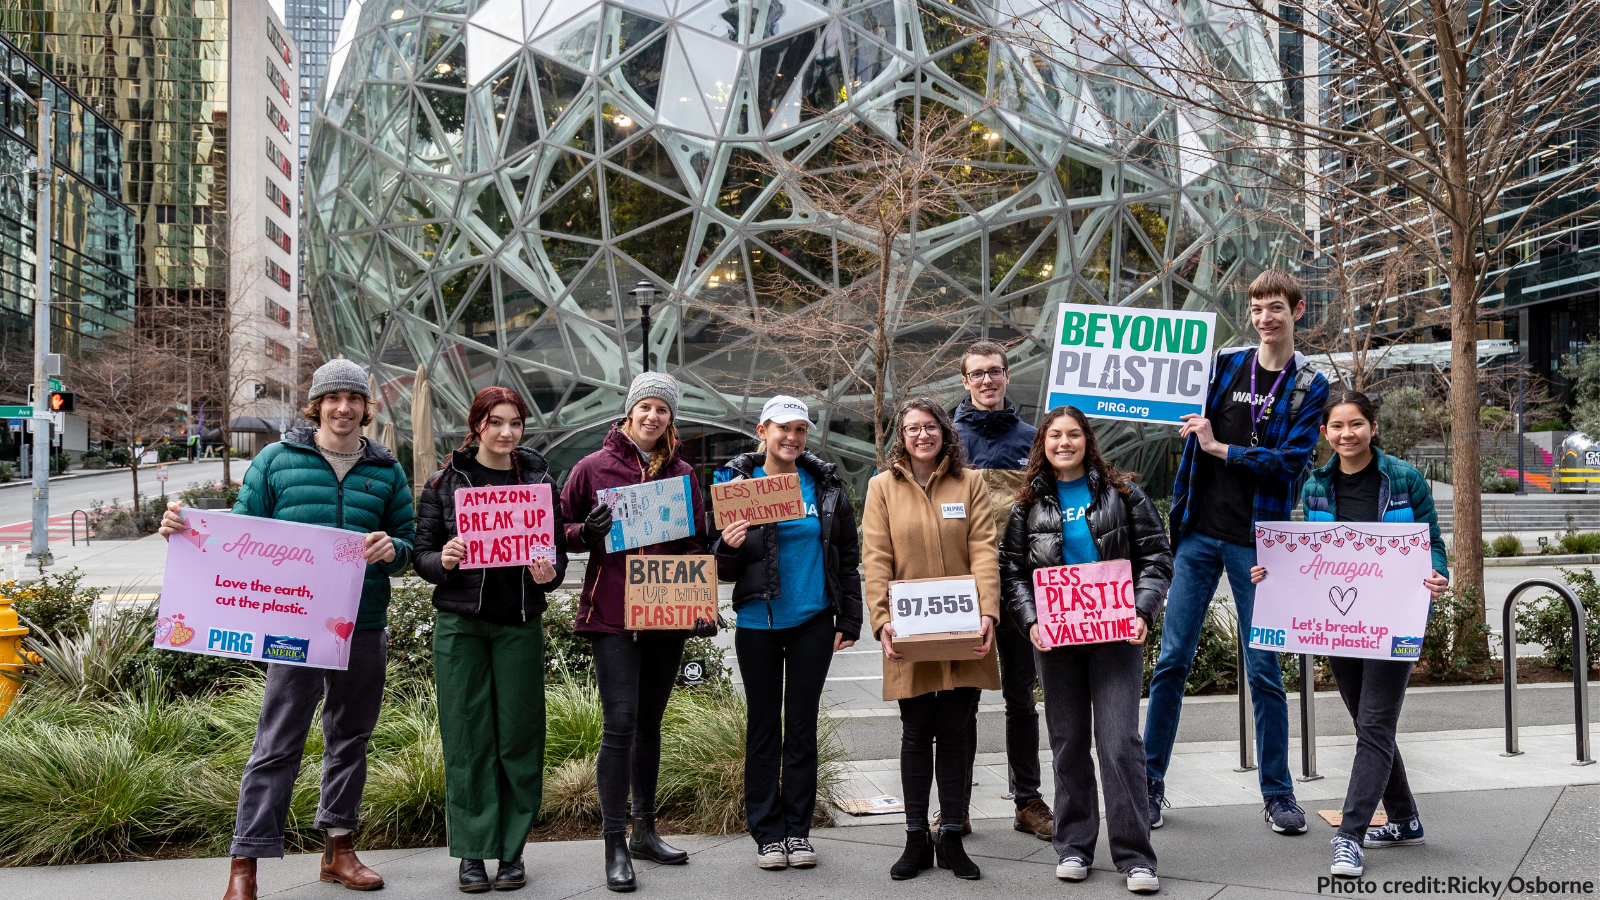 PIRG, Environment America, and Oceana delivered petition signatures to Amazon asking the e-commerce company to reduce plastic packaging